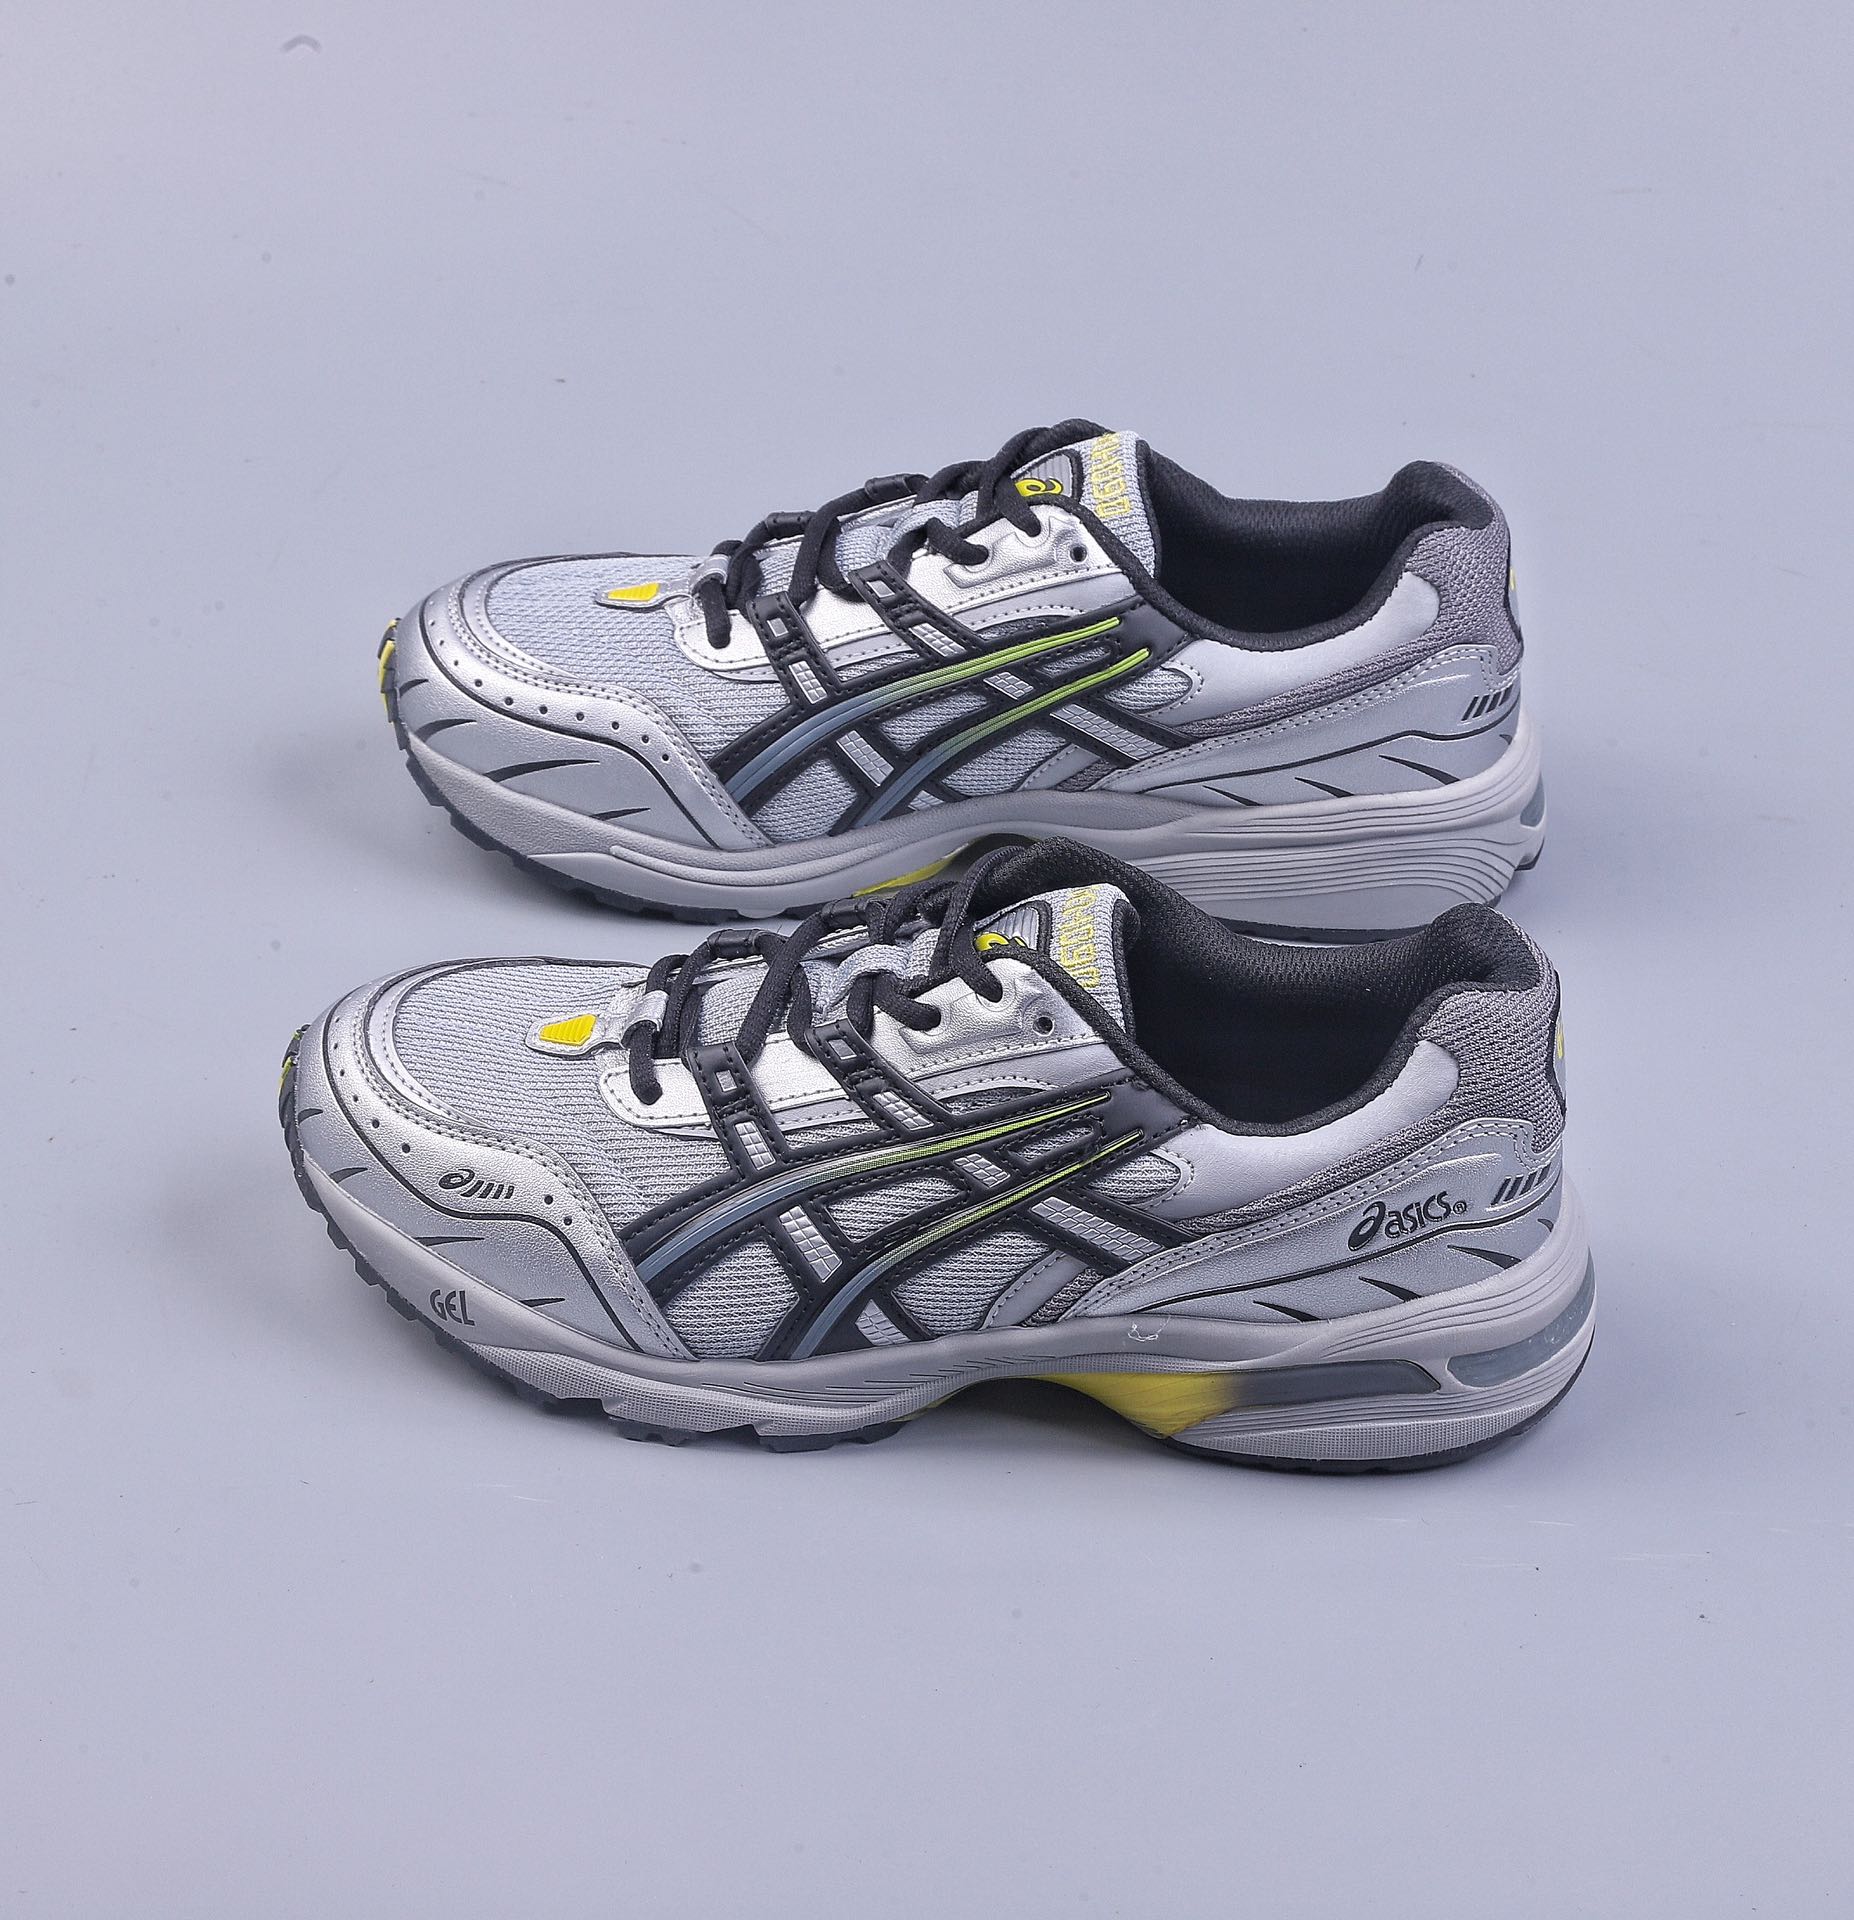 Asics Tiger GEL-1090 outdoor style low-top casual sports running shoes 1023A159-020